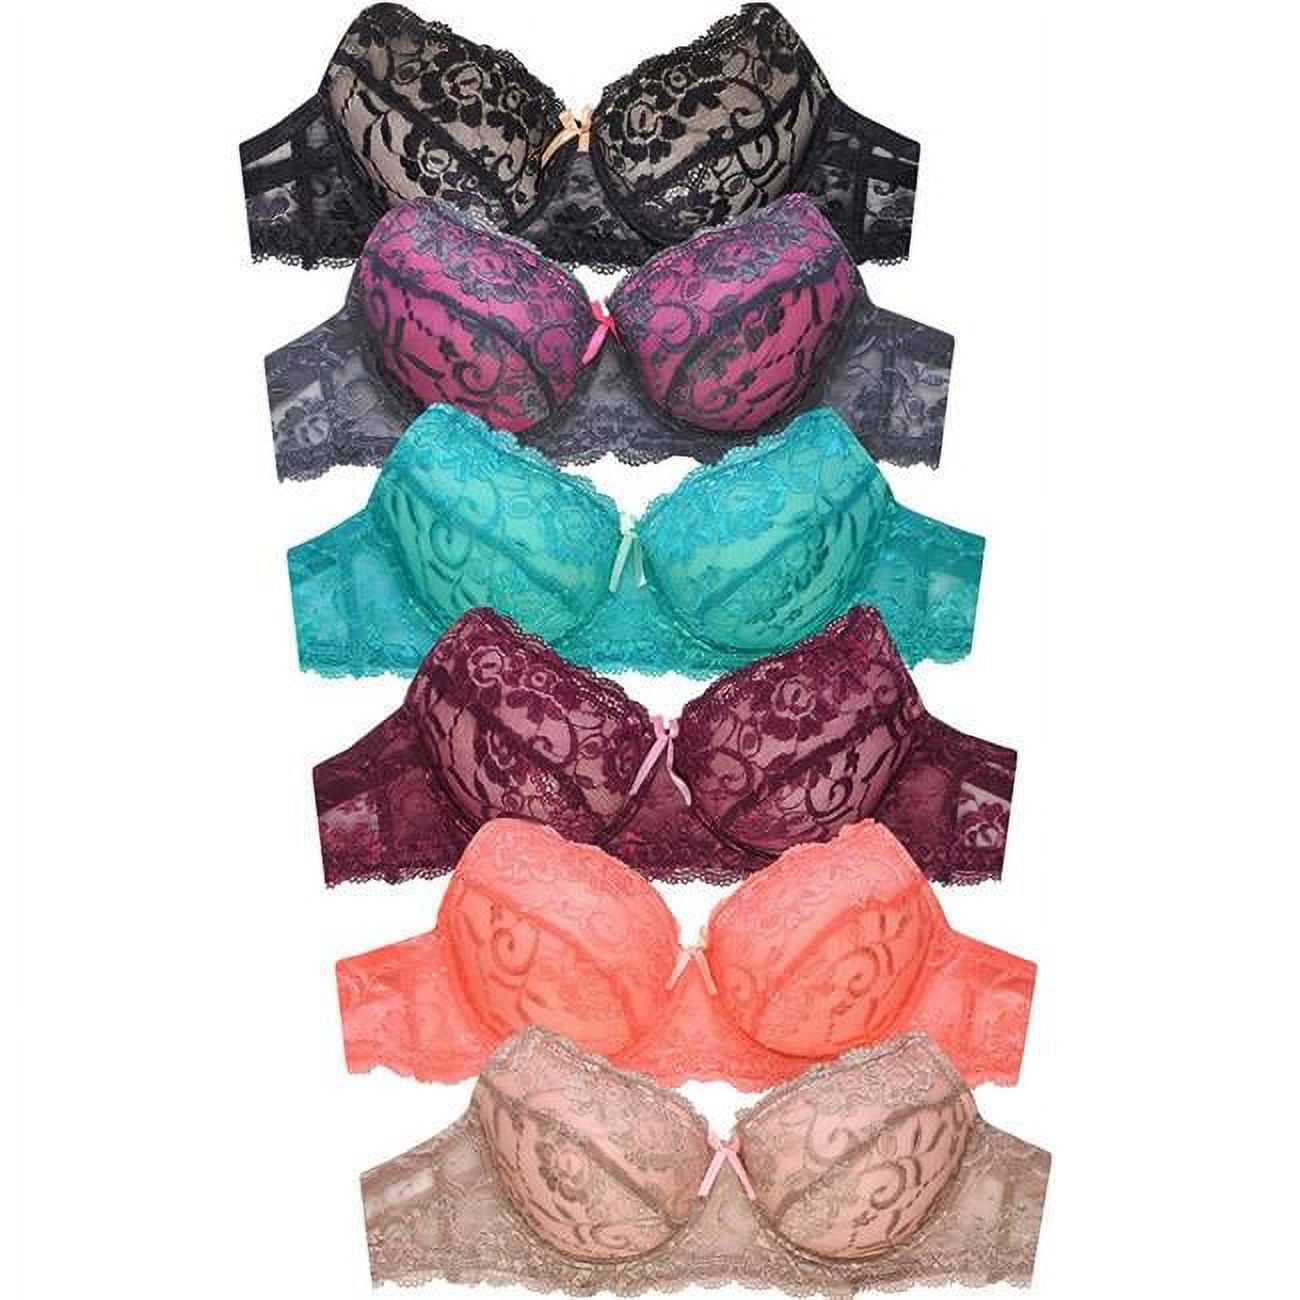 Mamia & Sofra BR4161L3D4-36DDD Womens Intimate Sets - Lace Full DDD Cup Bra  - 36 in. - Pack of 6 